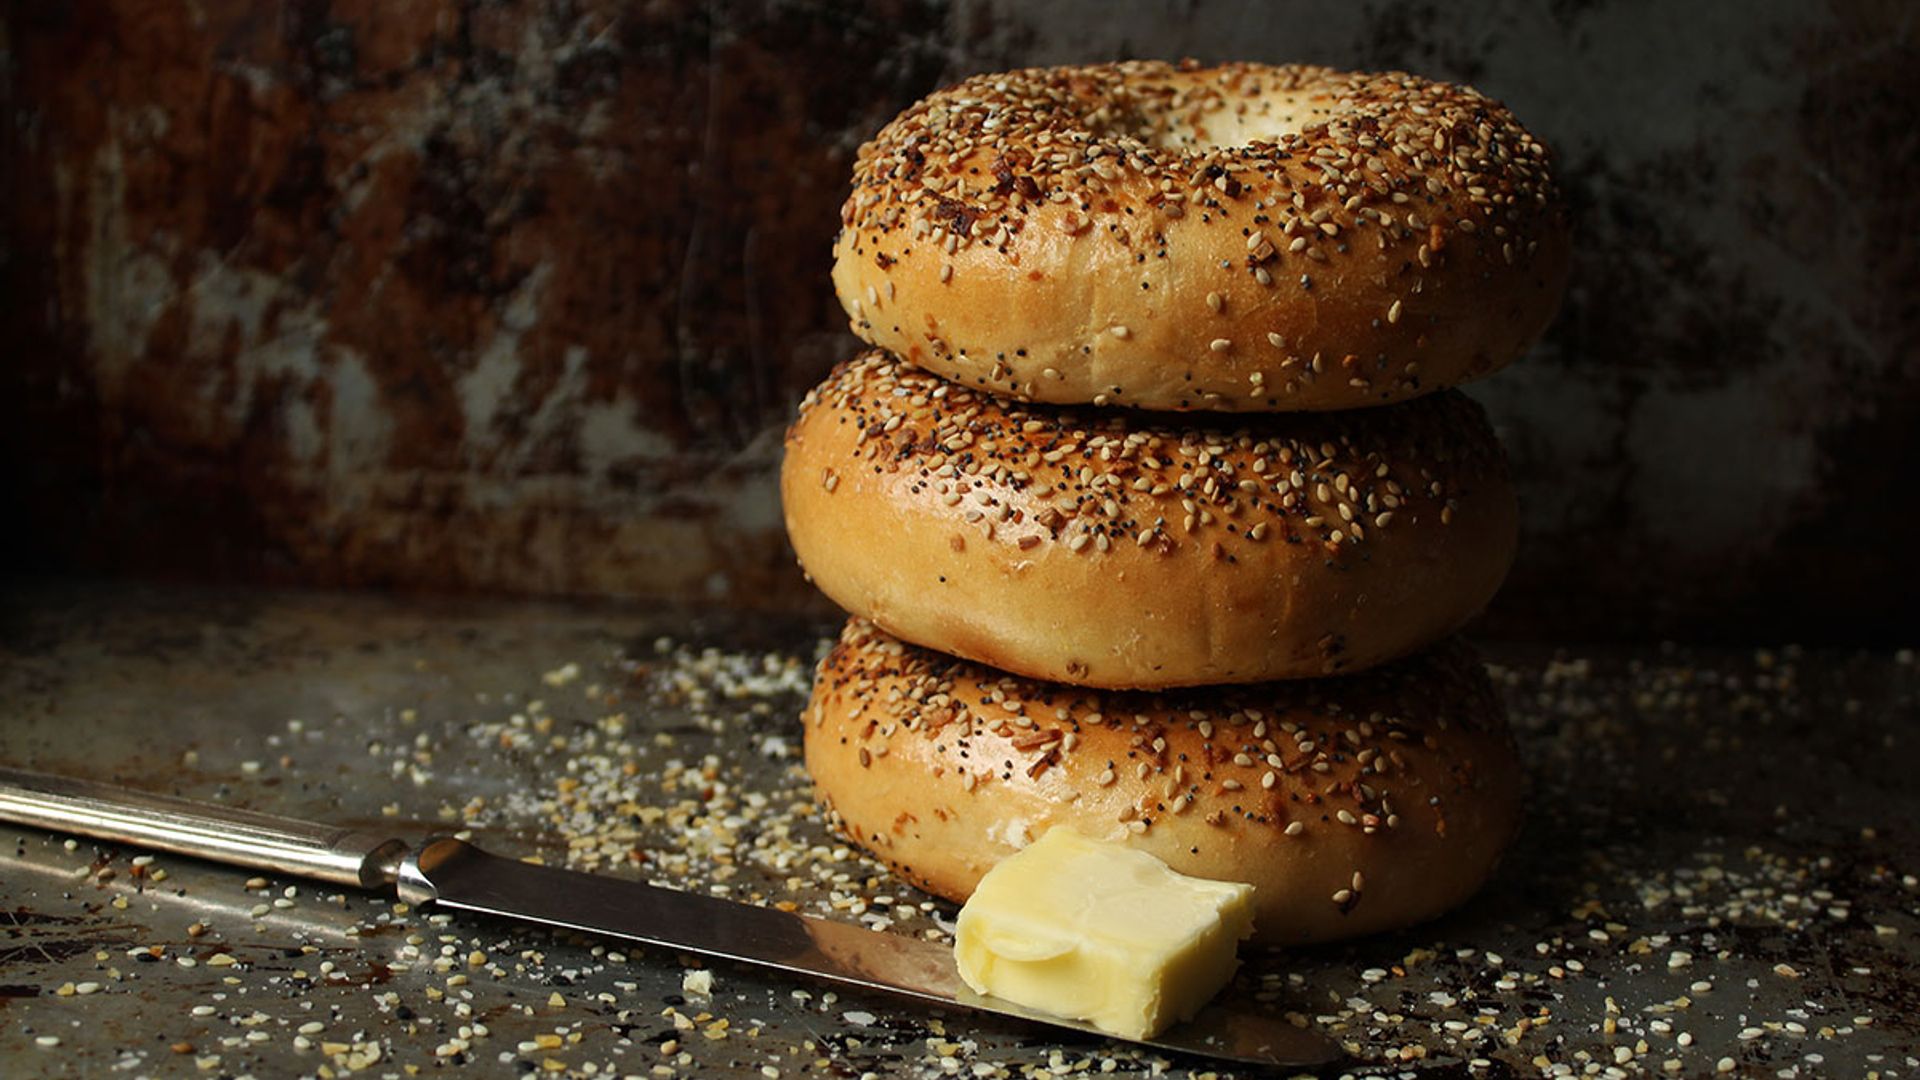 Marks & Spencer just answered all our carb-loving prayers with NEW sourdough bagels from Seattle